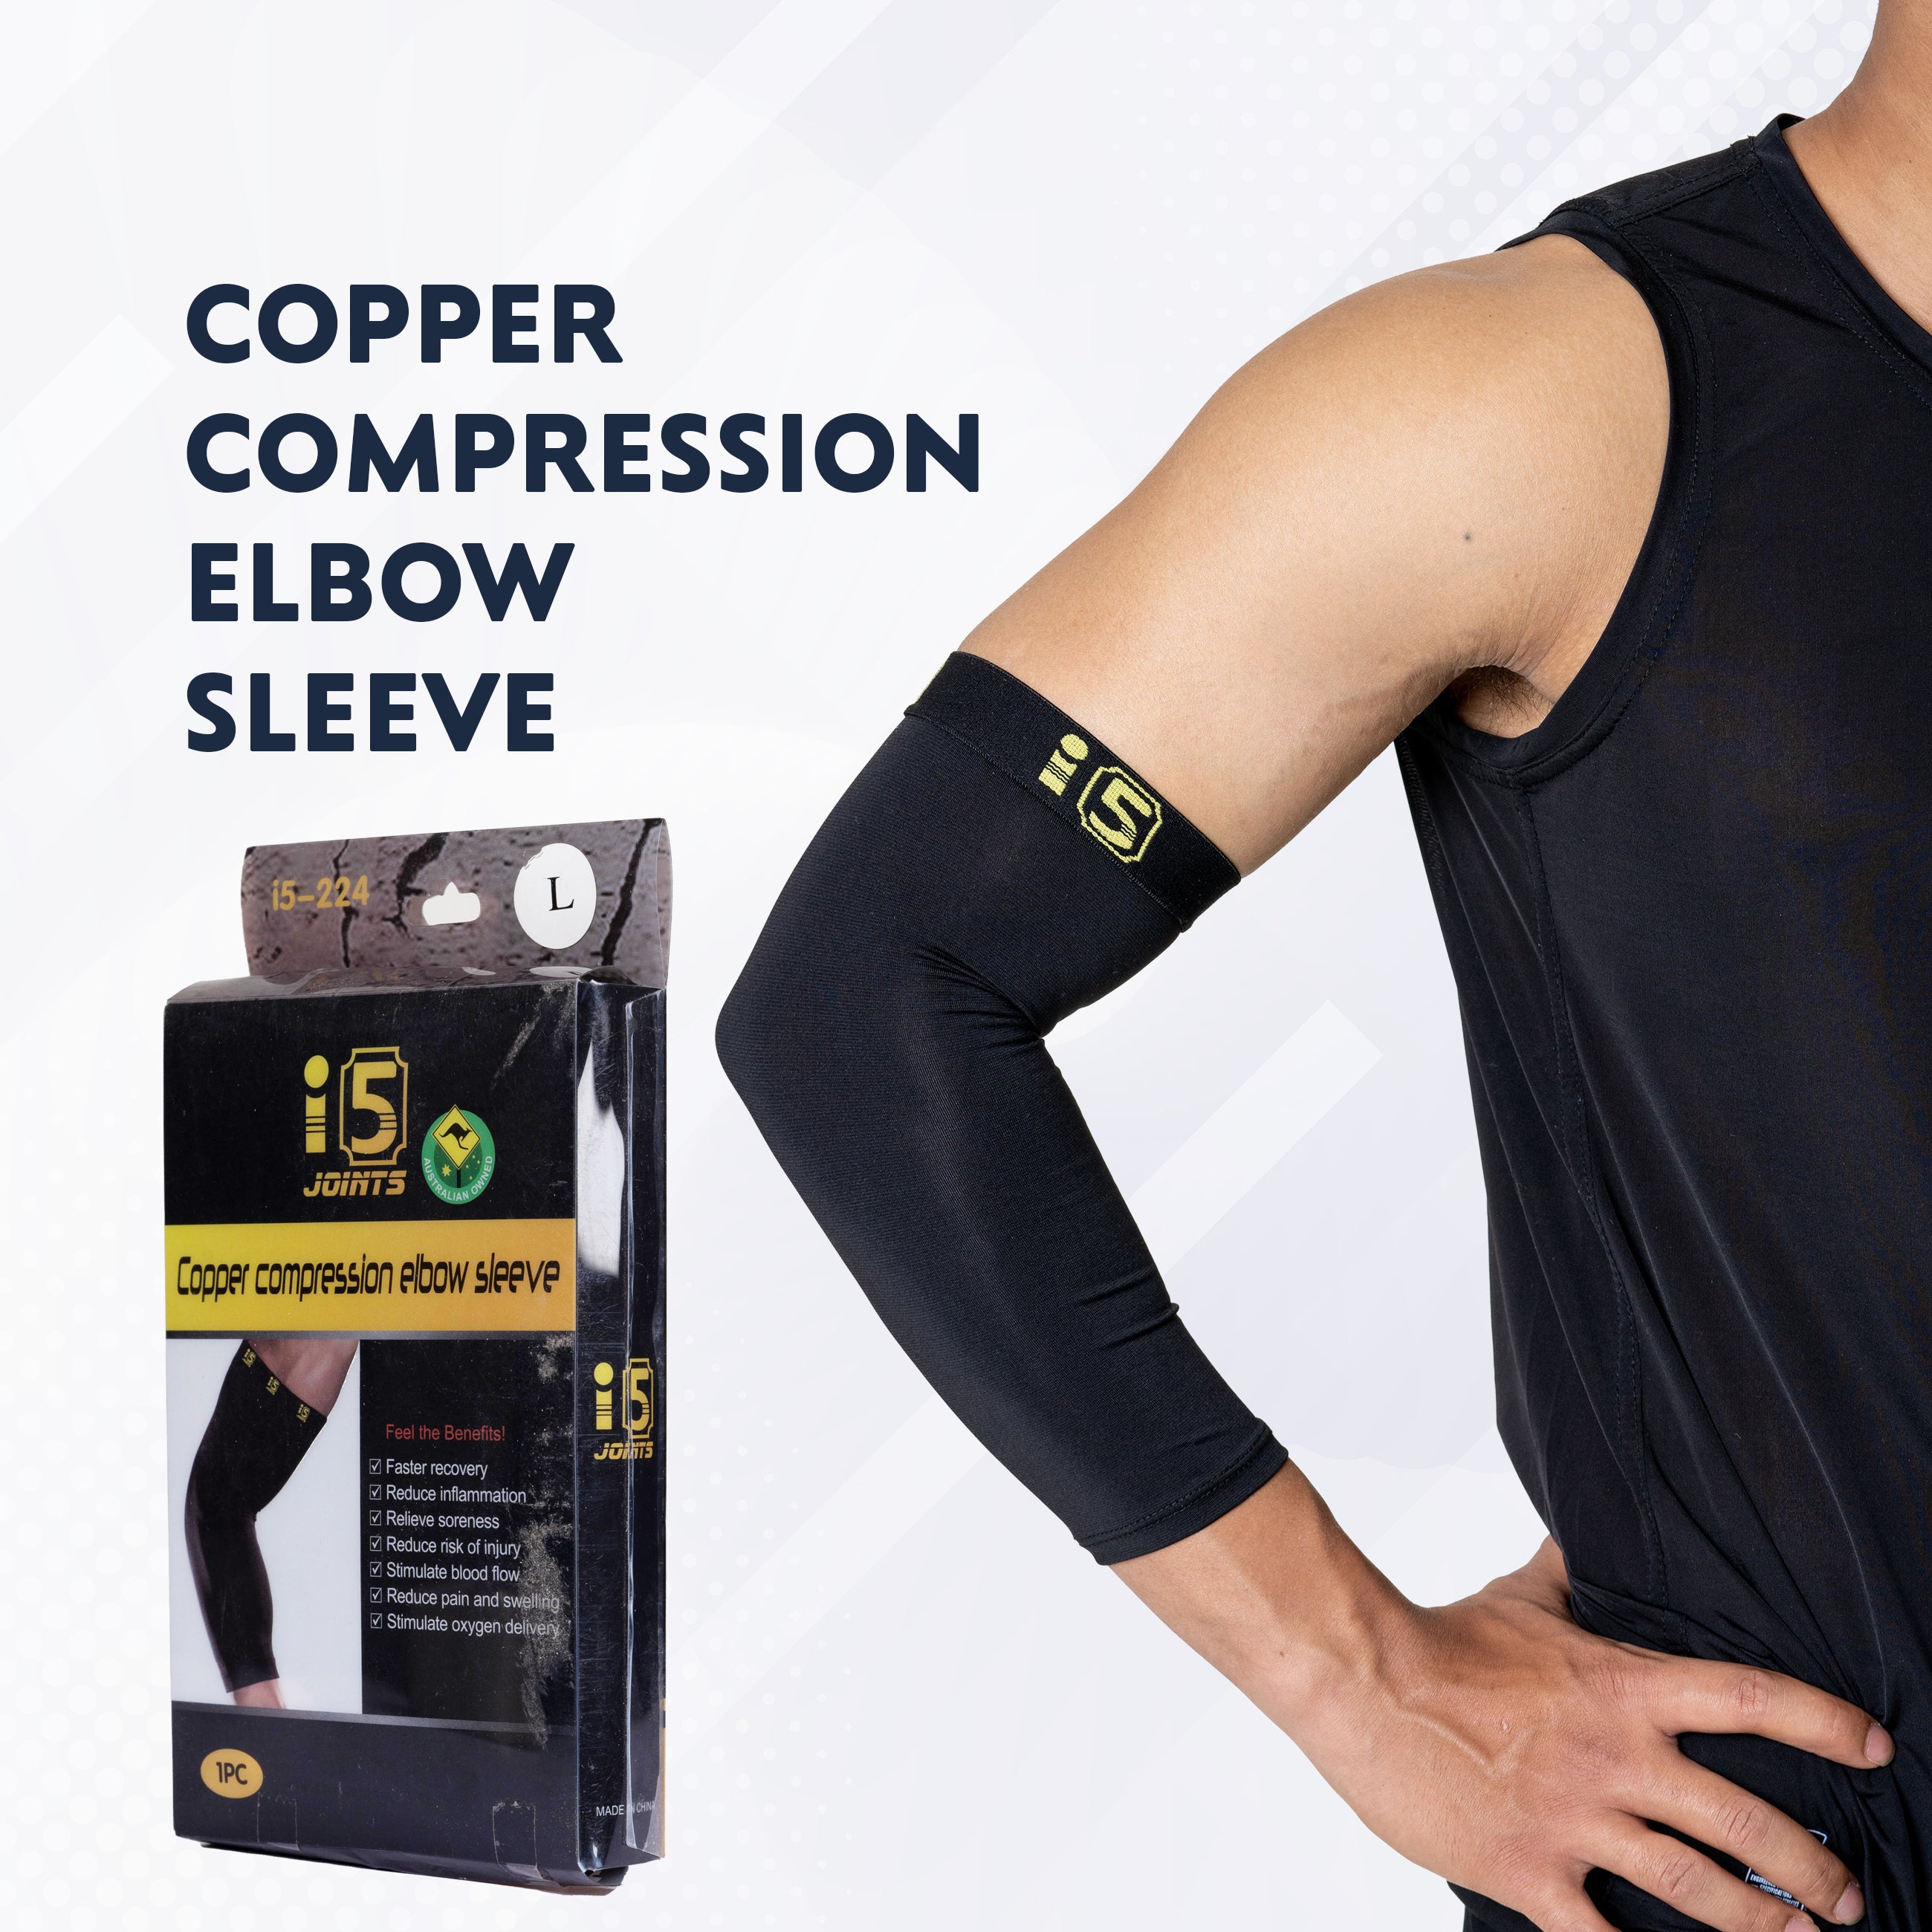 I5Joints-Cooper Compression Elbow Support(Elbow Compression Cap For Men & Women|Workout, Gym, Pain Relief, Quick Recovery, Tennis, Golf, Gym Fitness, Volleyball, Cricket| Prevent Injuries|Single Pair))